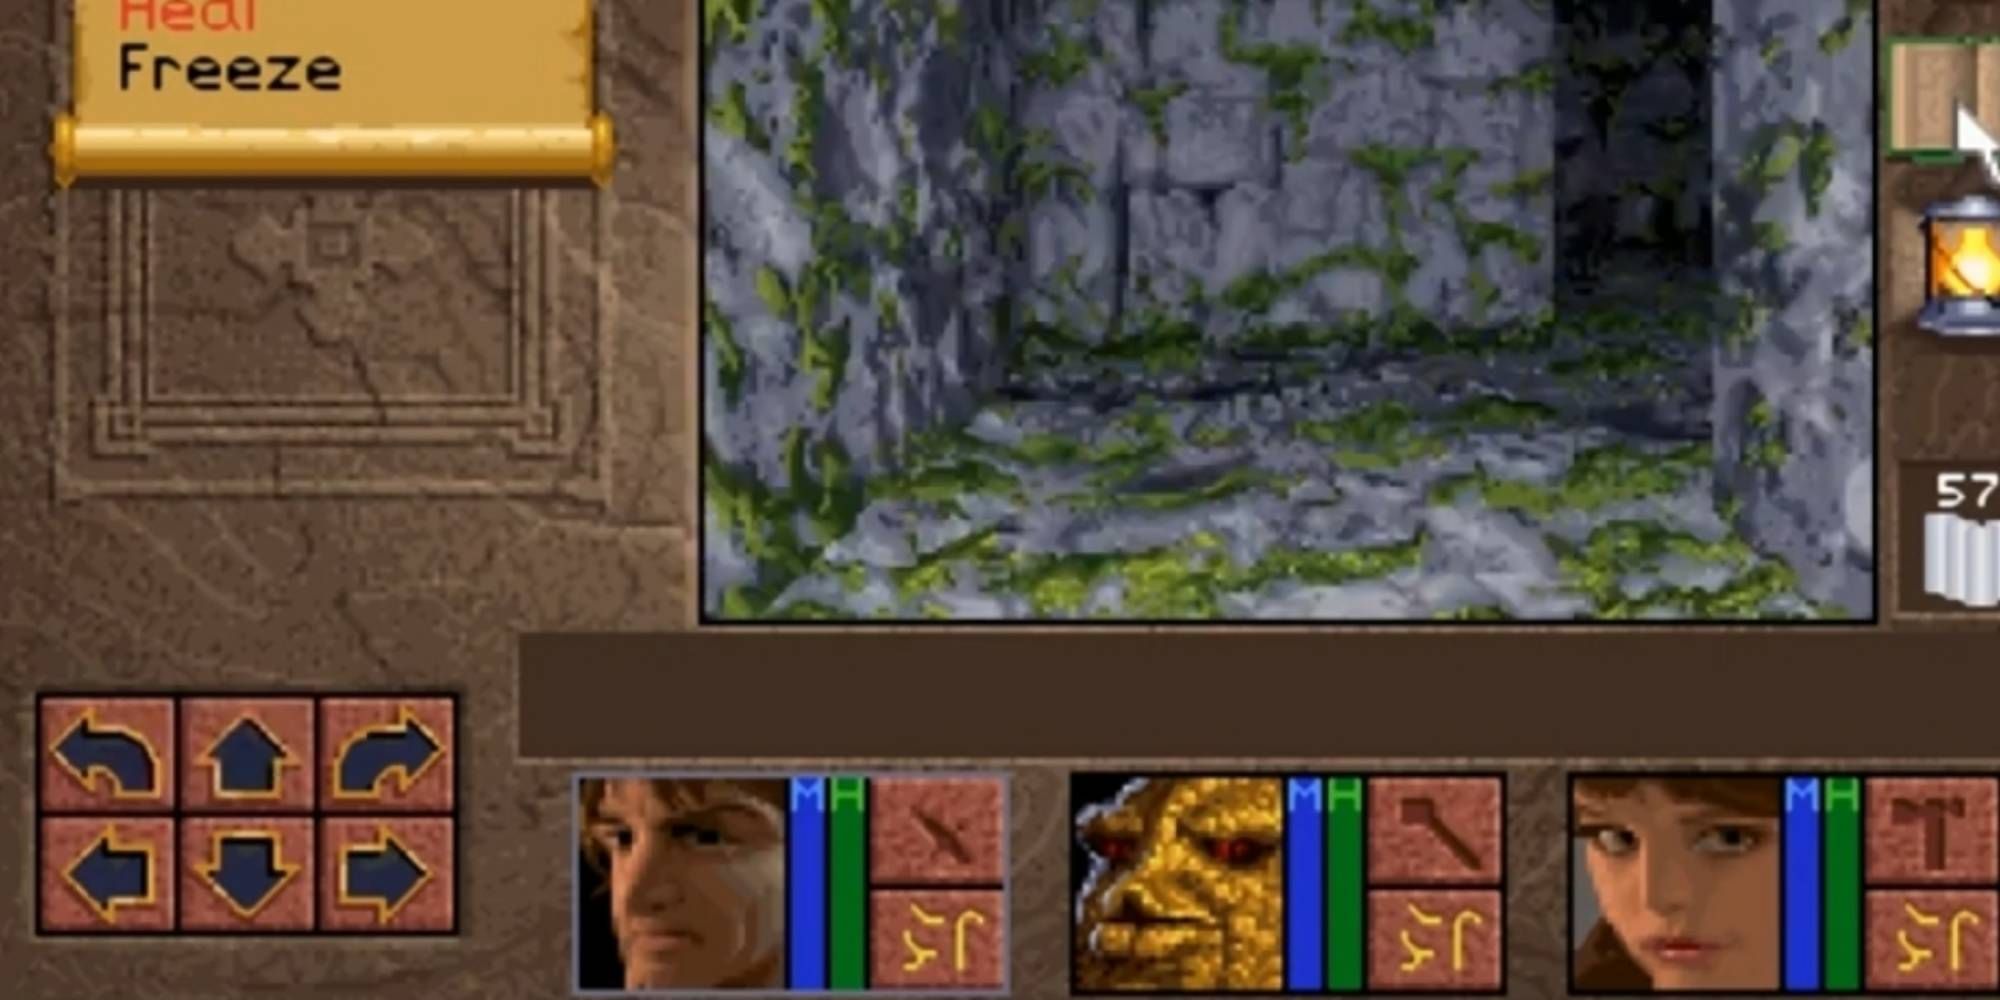 Exploring a Stone Dungeon in Heroes of Might and Magic 3